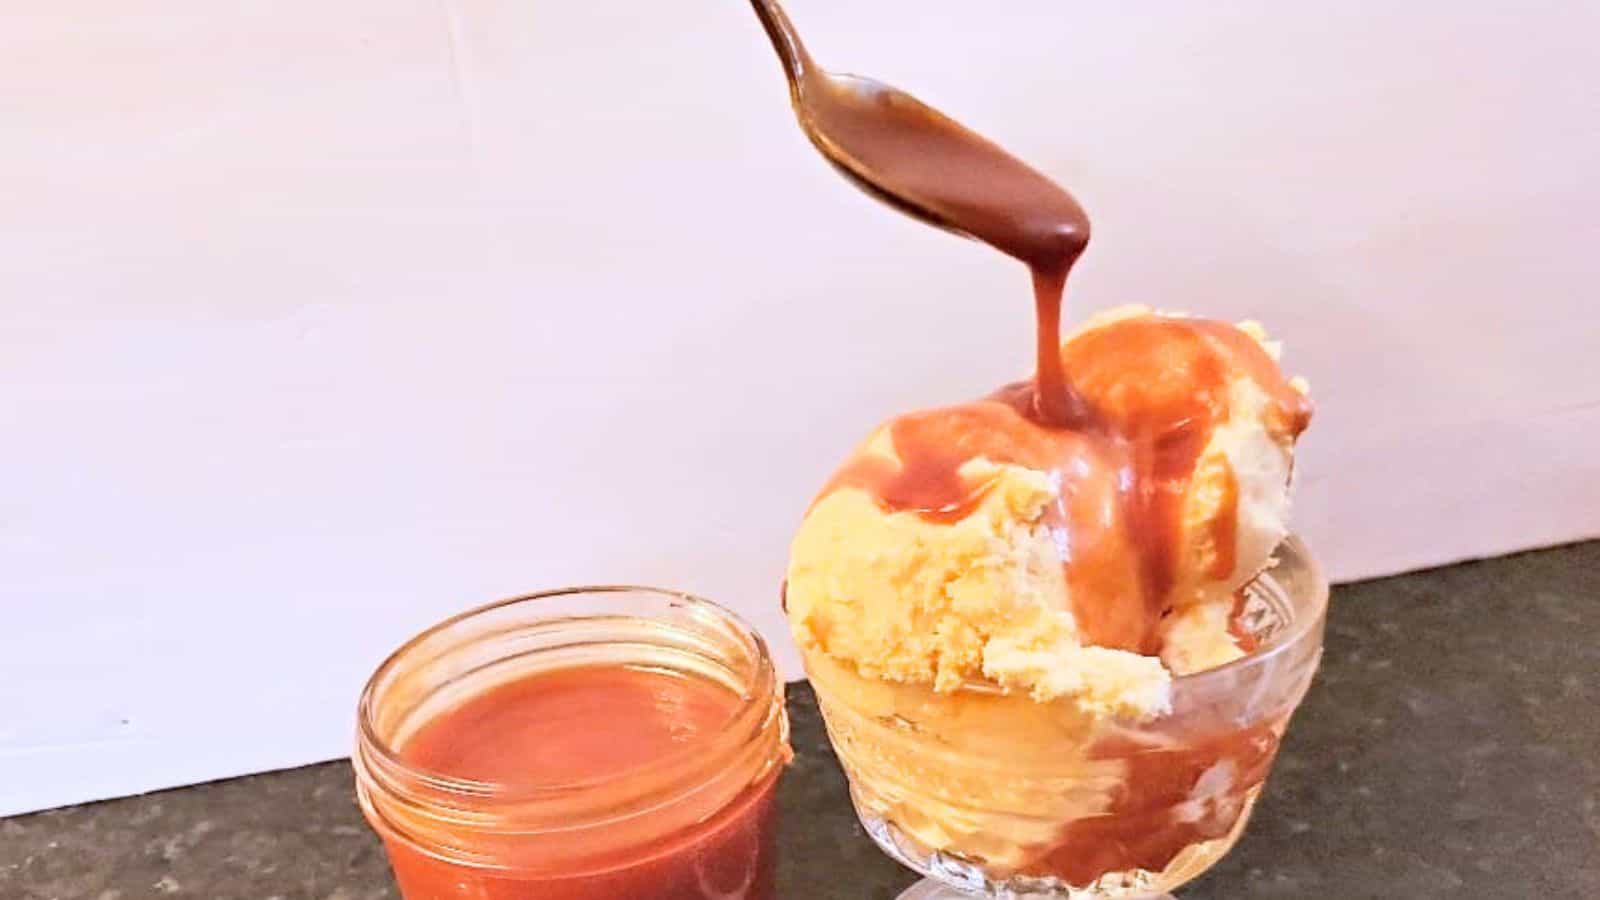 Image shows Caramel sauce being poured onto a scoop of vanilla ice cream in a glass bowl, with a jar of caramel sauce beside it.